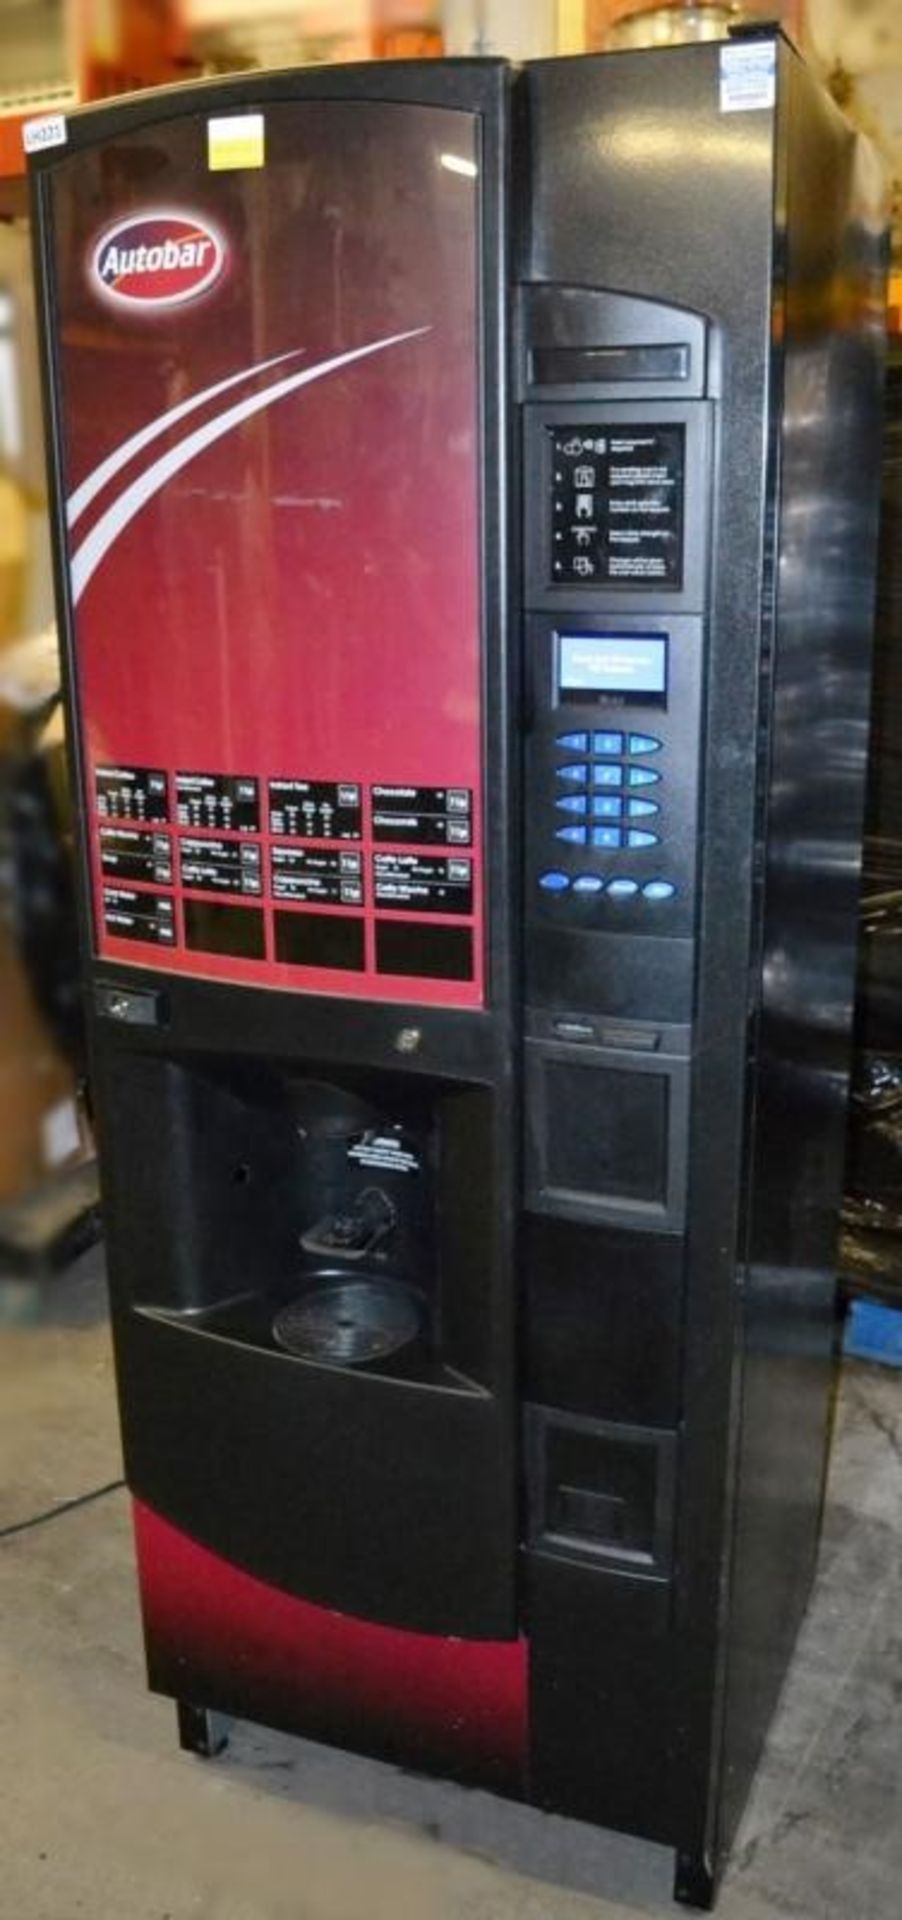 1 x Crane "Evolution" Coin-operated Hot Drinks Vending Machine - Recently taken From A Working Envir - Image 2 of 17